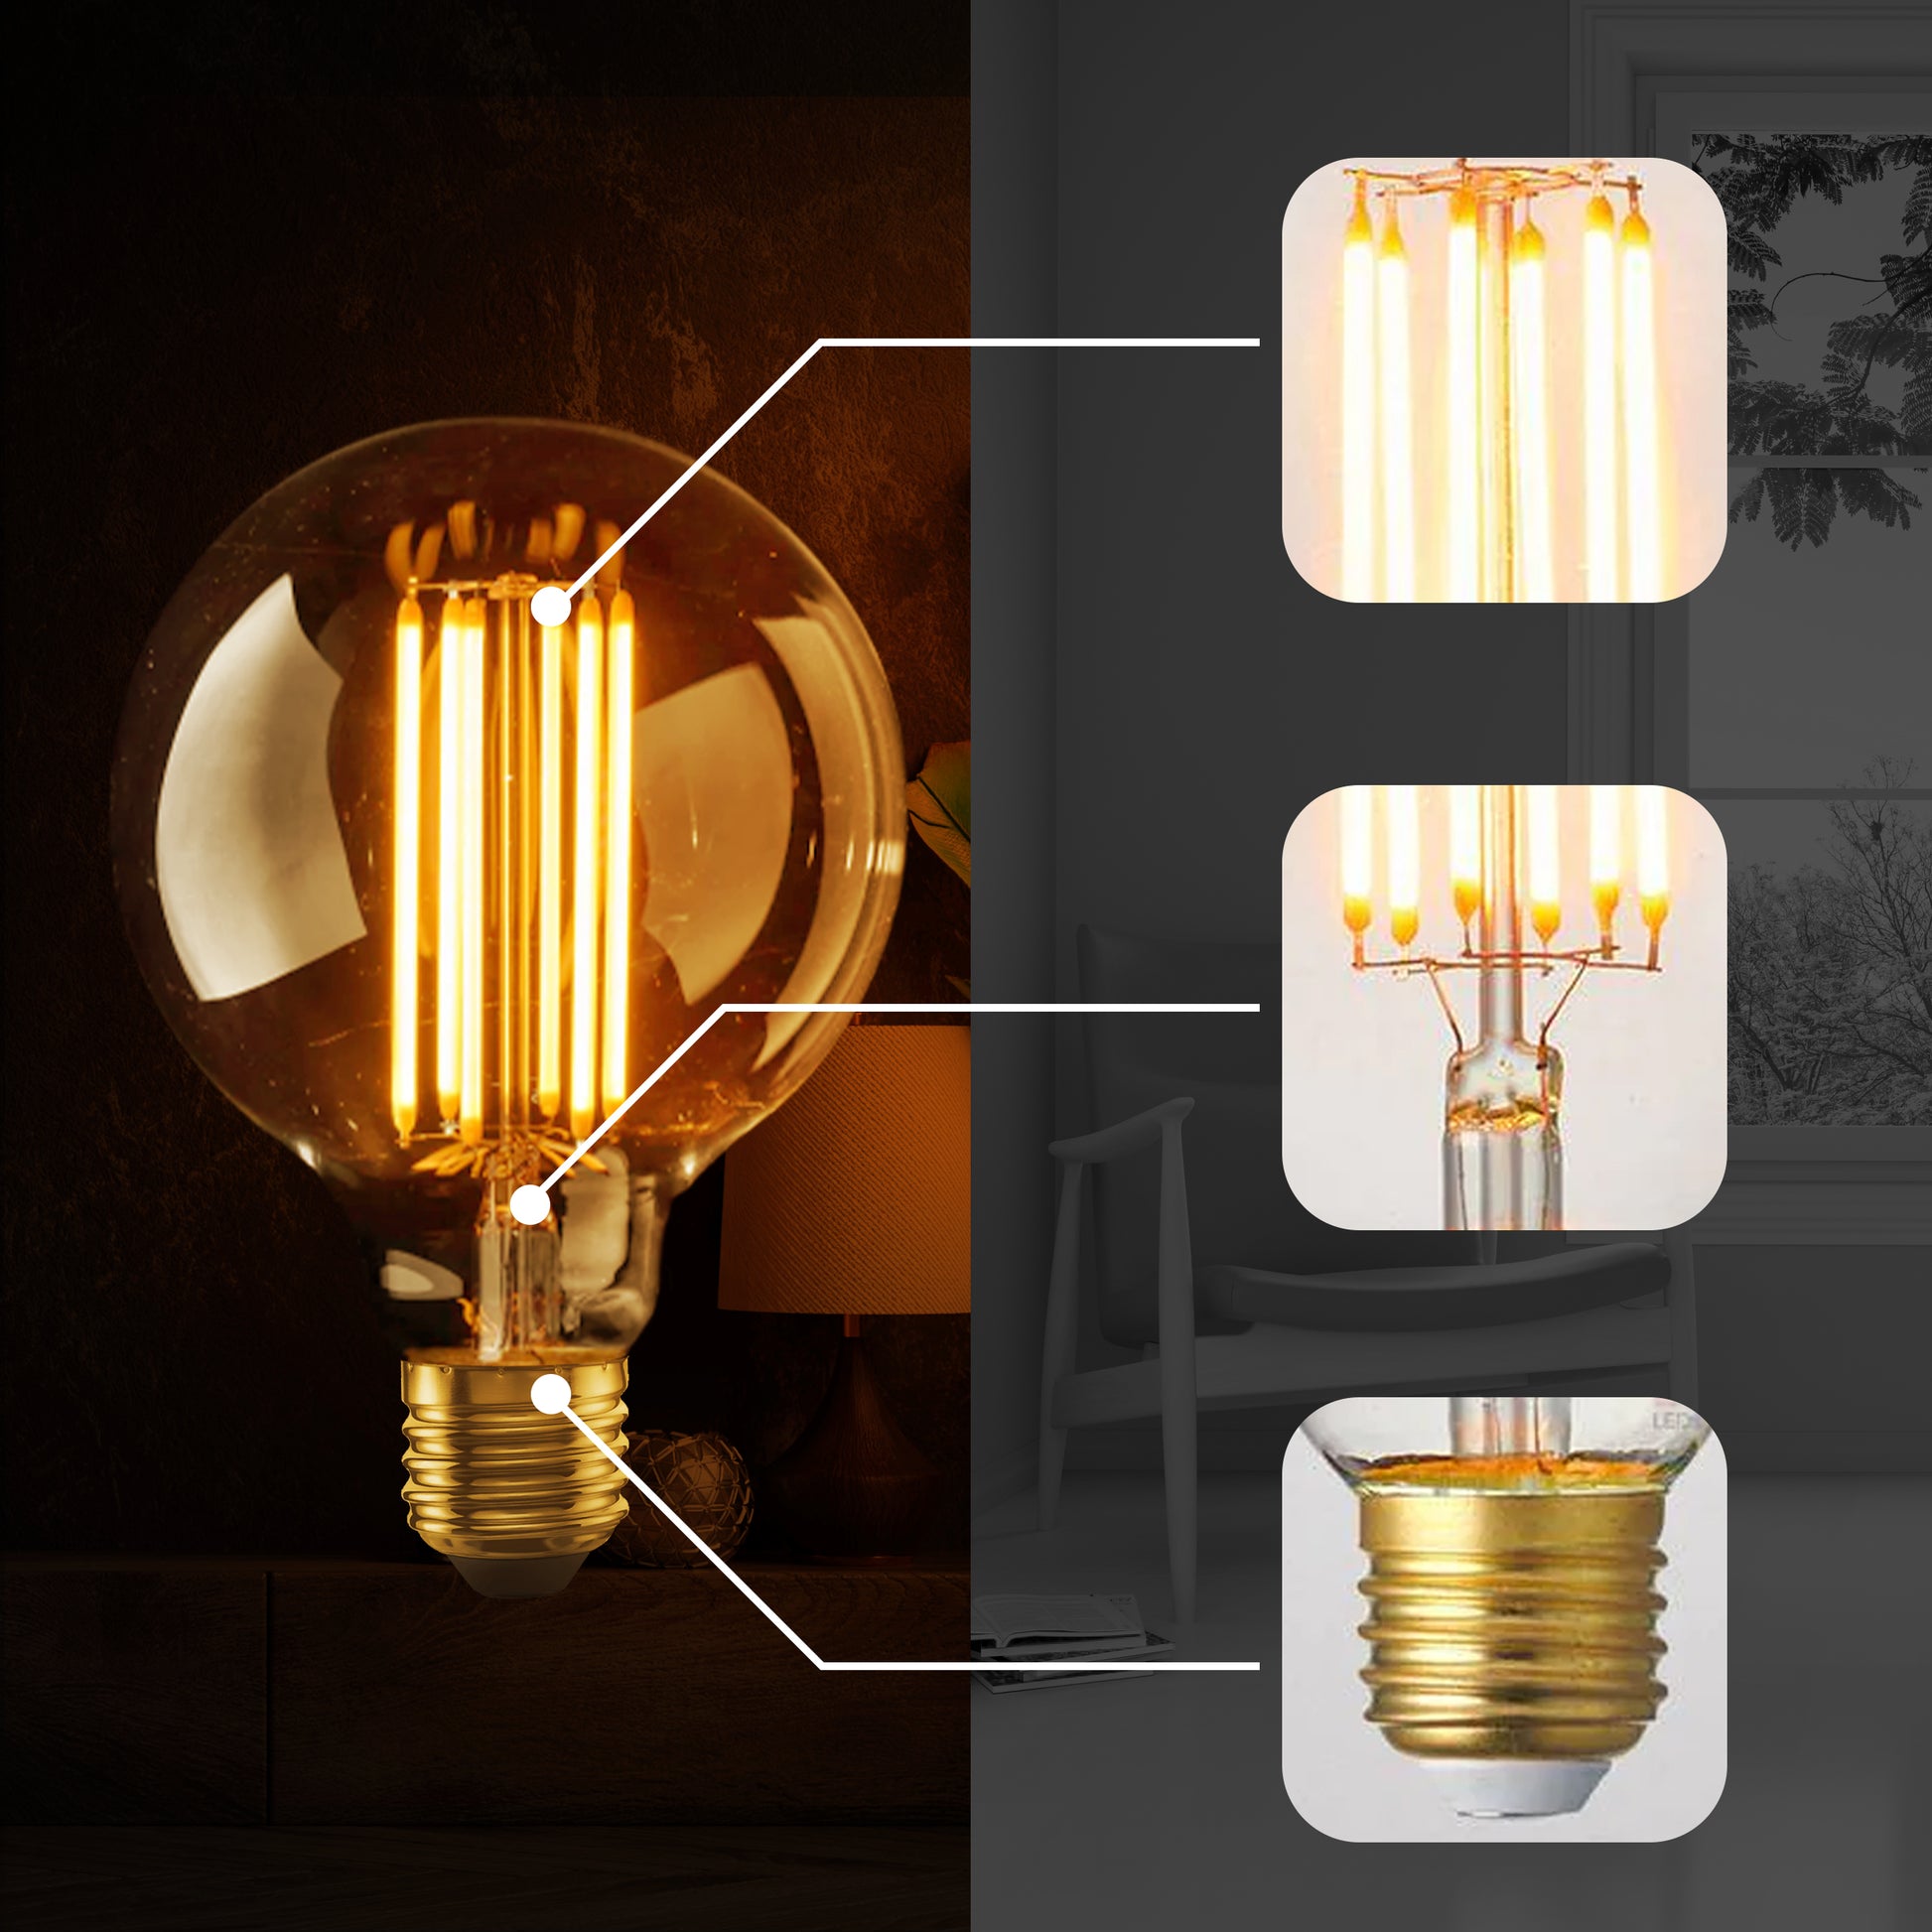 Dimmable LED Retro Light 